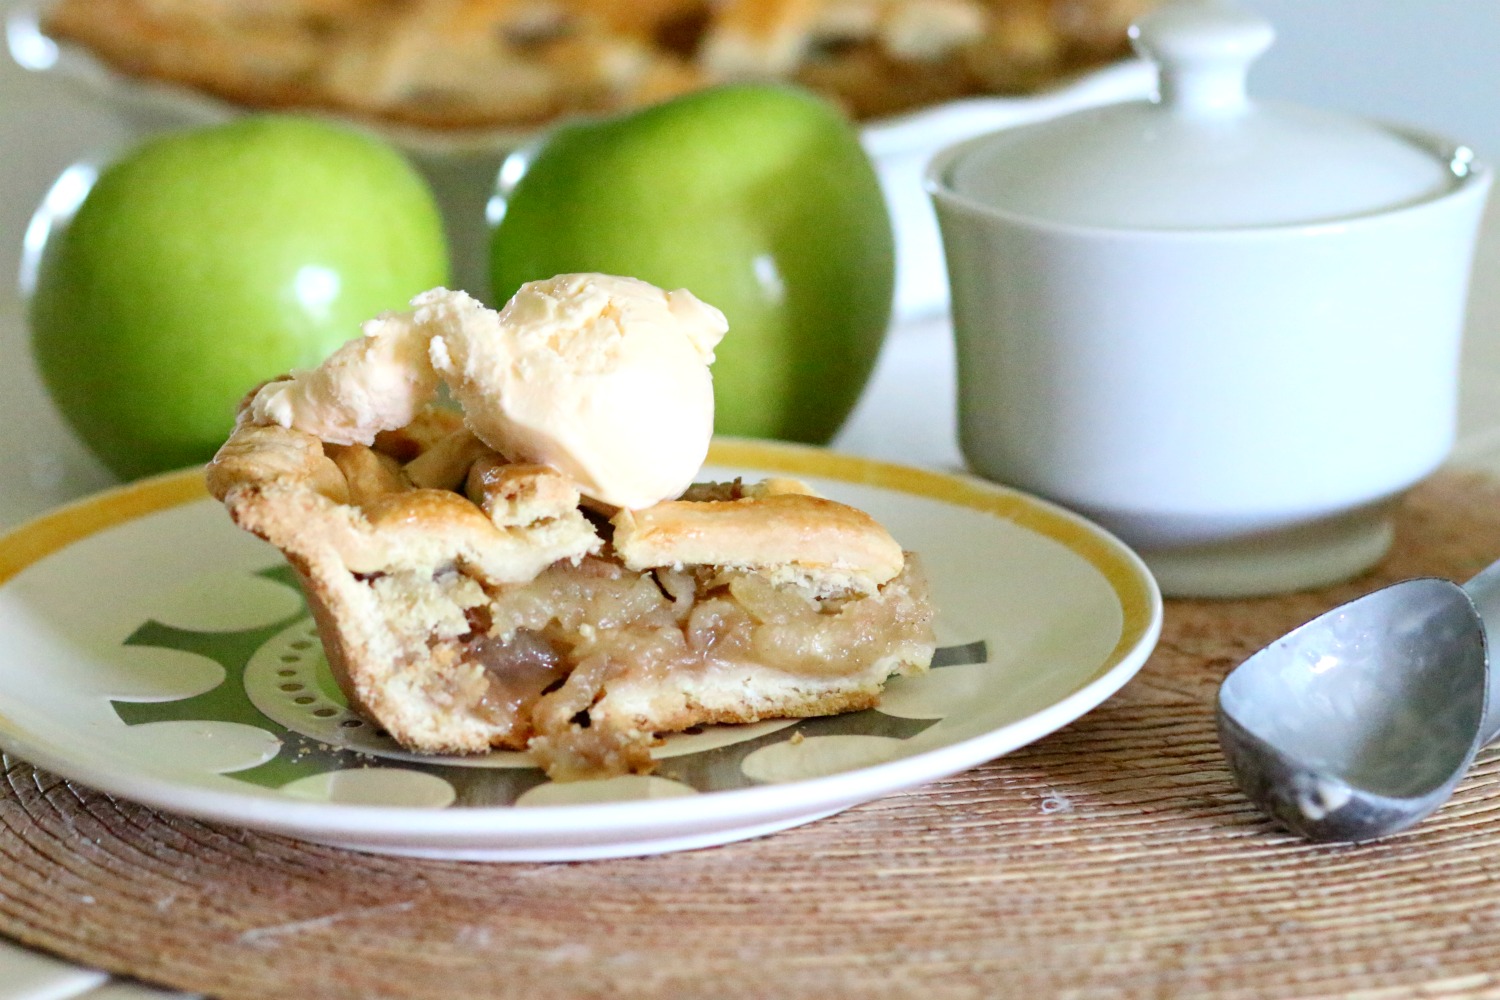 This Homemade Apple Pie recipe is a classic dessert that incorporates the flavor of fresh apples with a flaky homemade pie crust. Everything merges to create a blissful and irresistible treat with exquisite flavors in every bite.